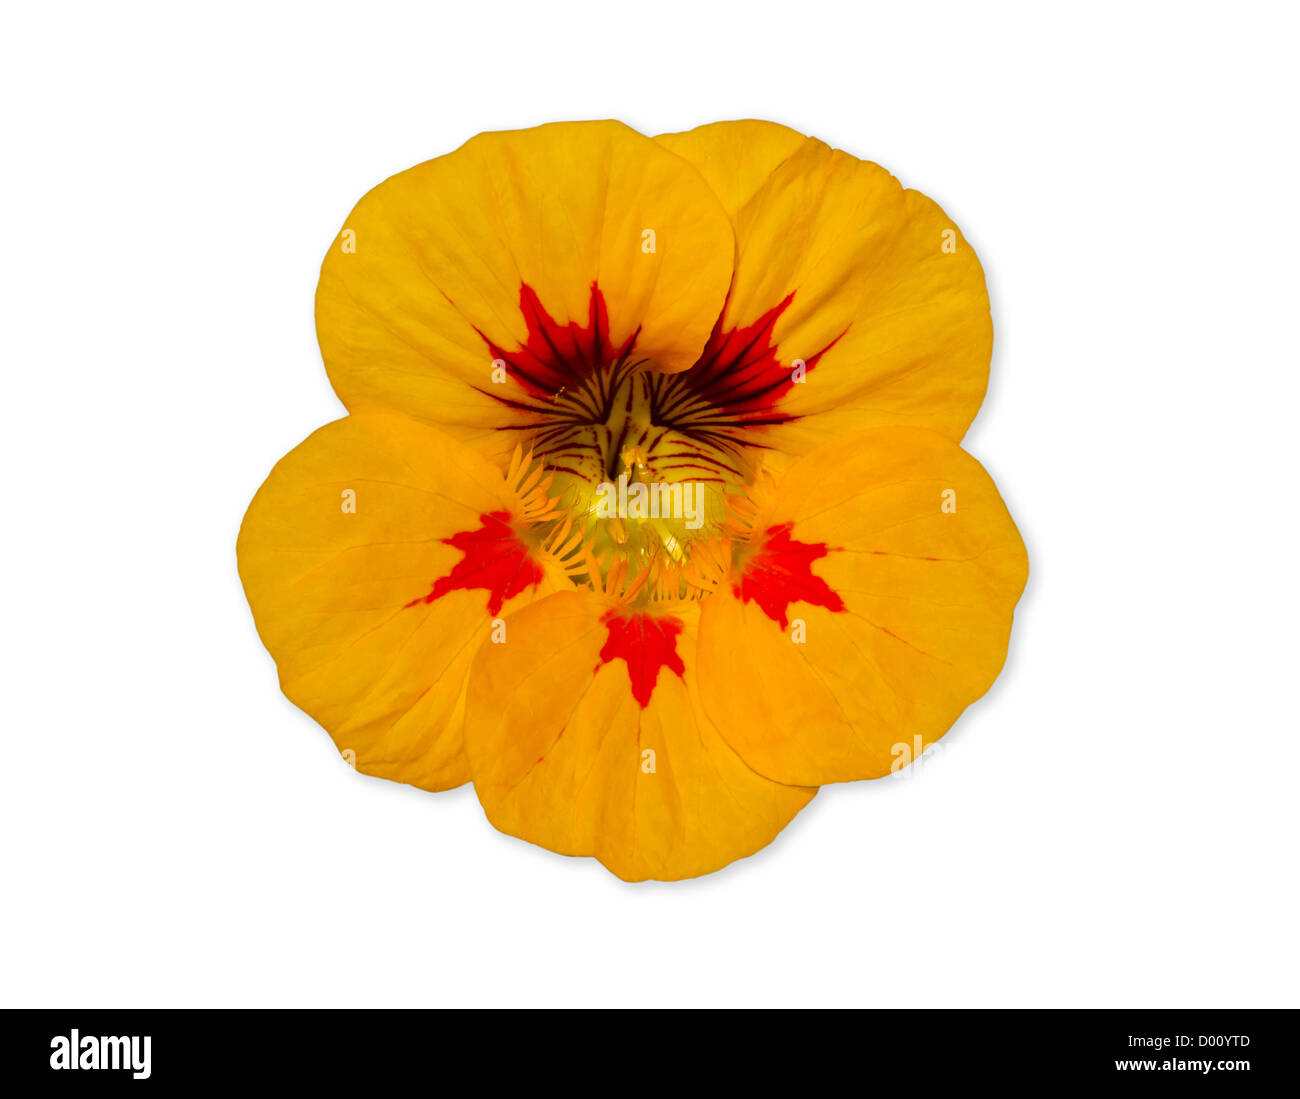 Yellow nasturtium flower isolated over white with clipping path Stock Photo